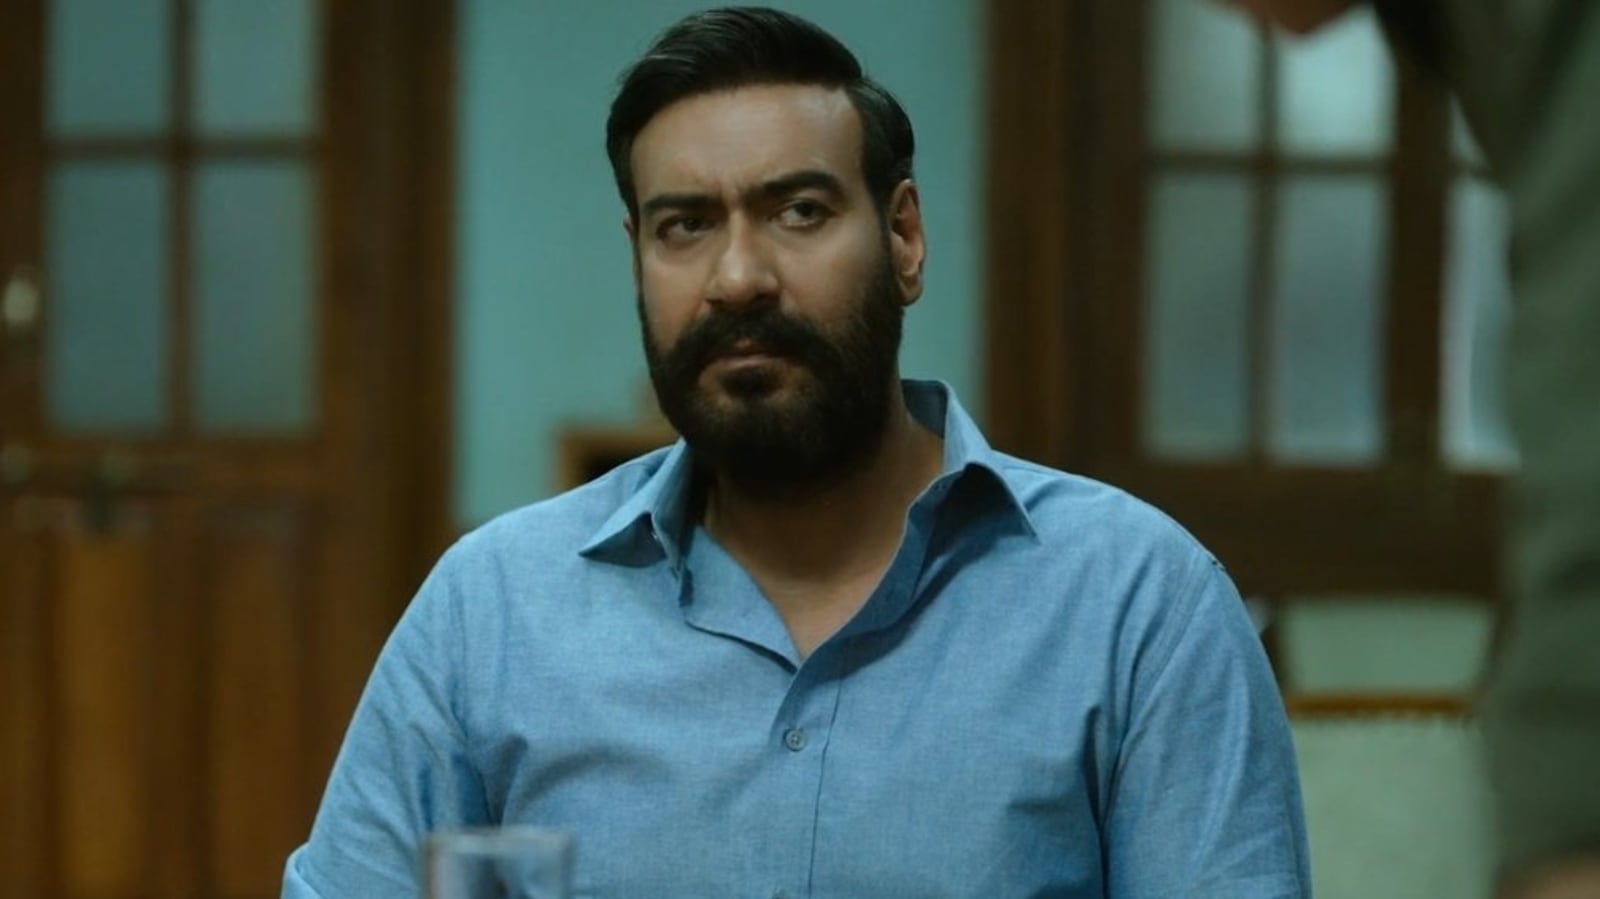 ajay-devgn-says-drishyam-2-is-very-different-from-mohanlal-s-version-lots-of-changes-and-new-characters